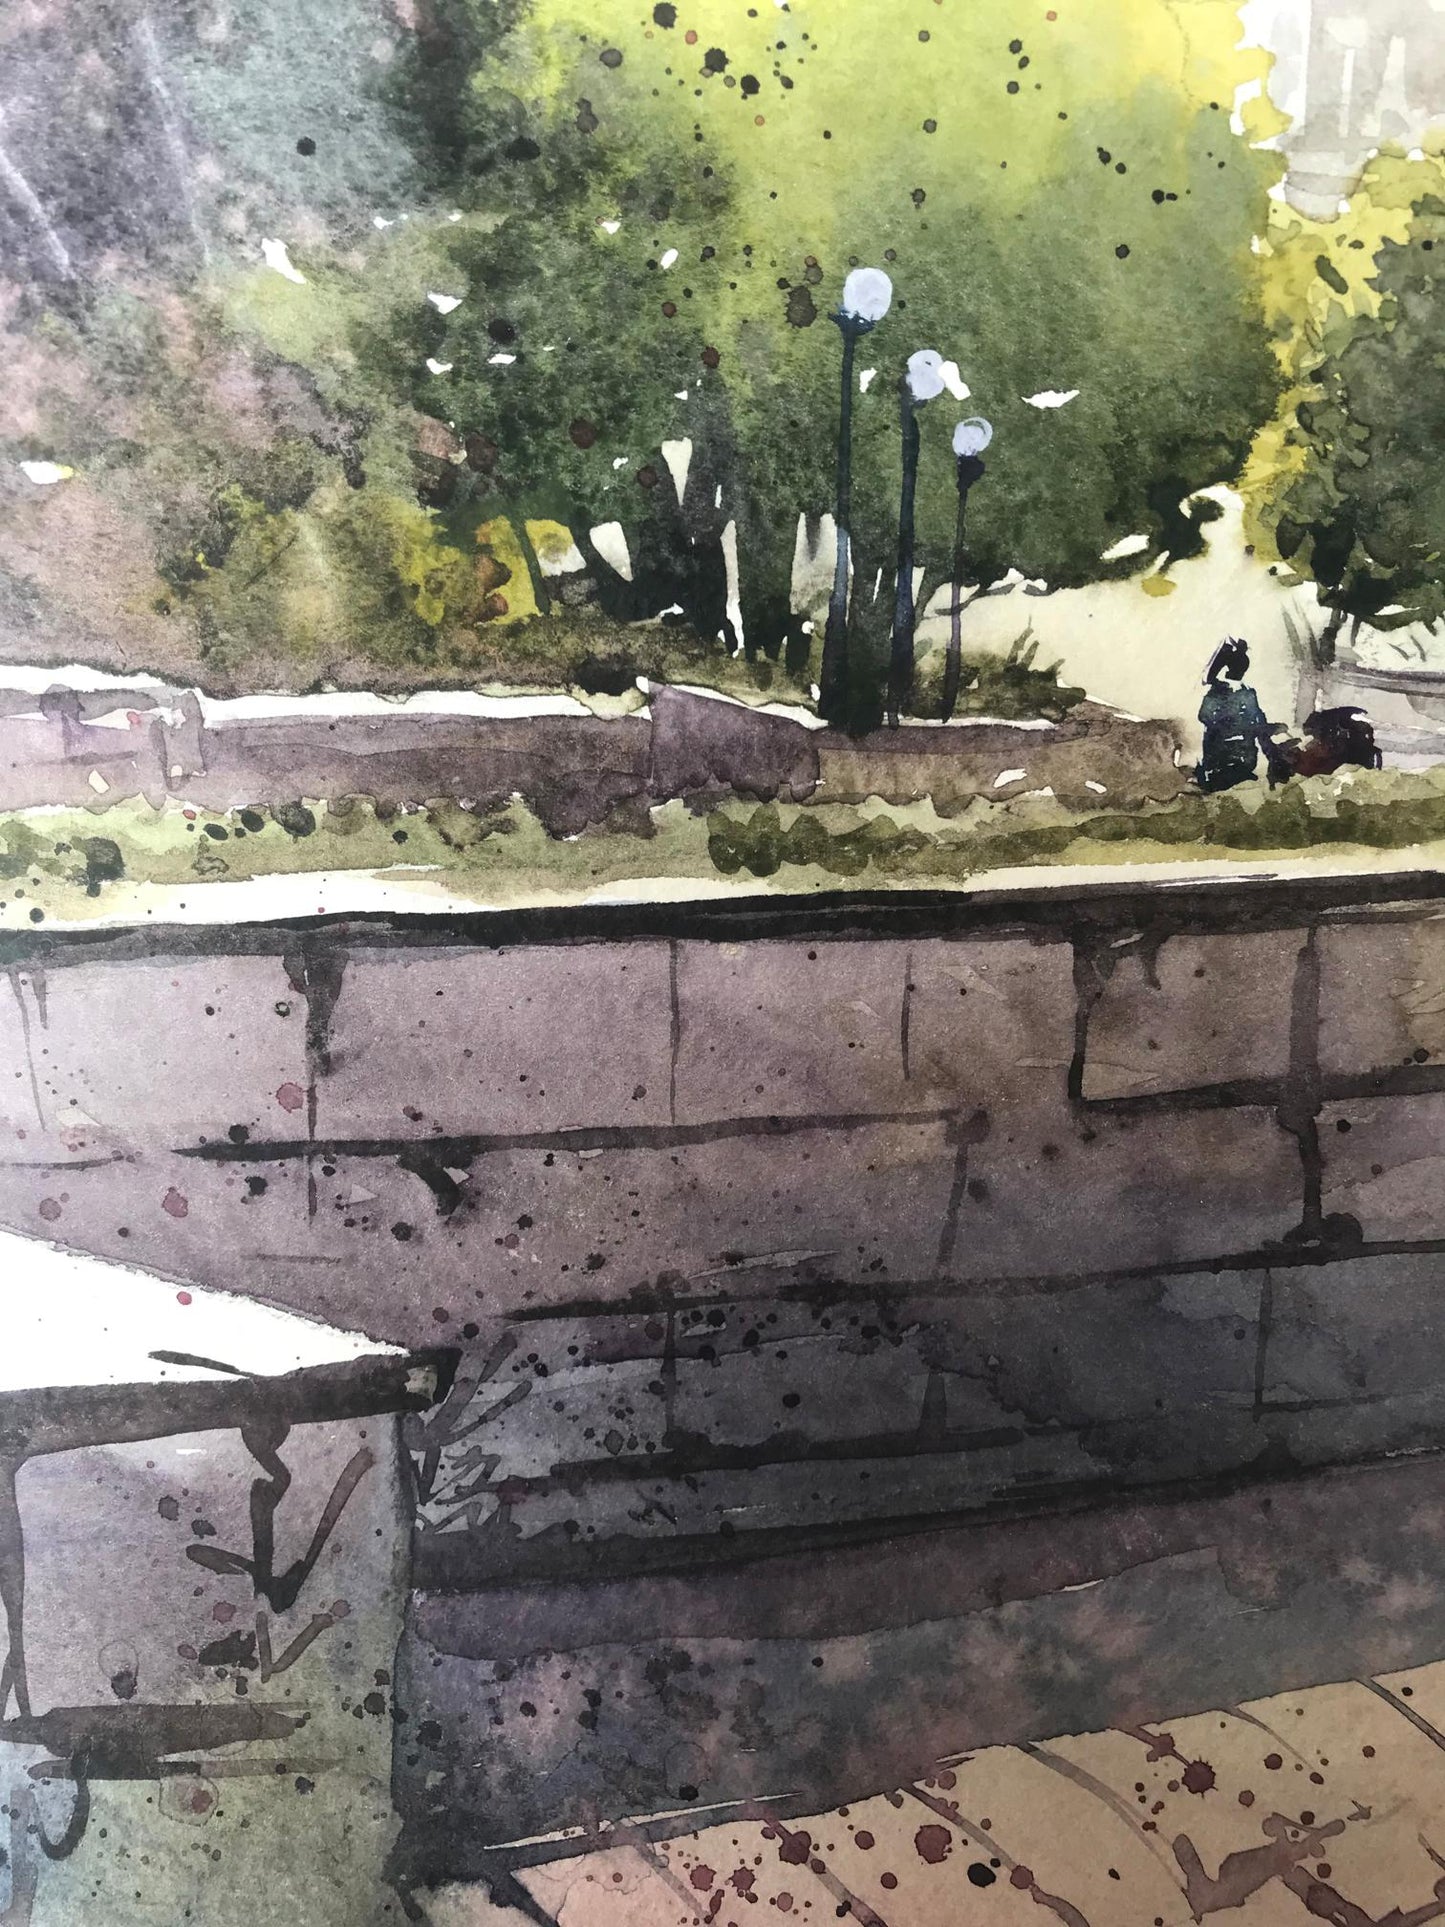 Watercolor painting City recreation park Unknown artist